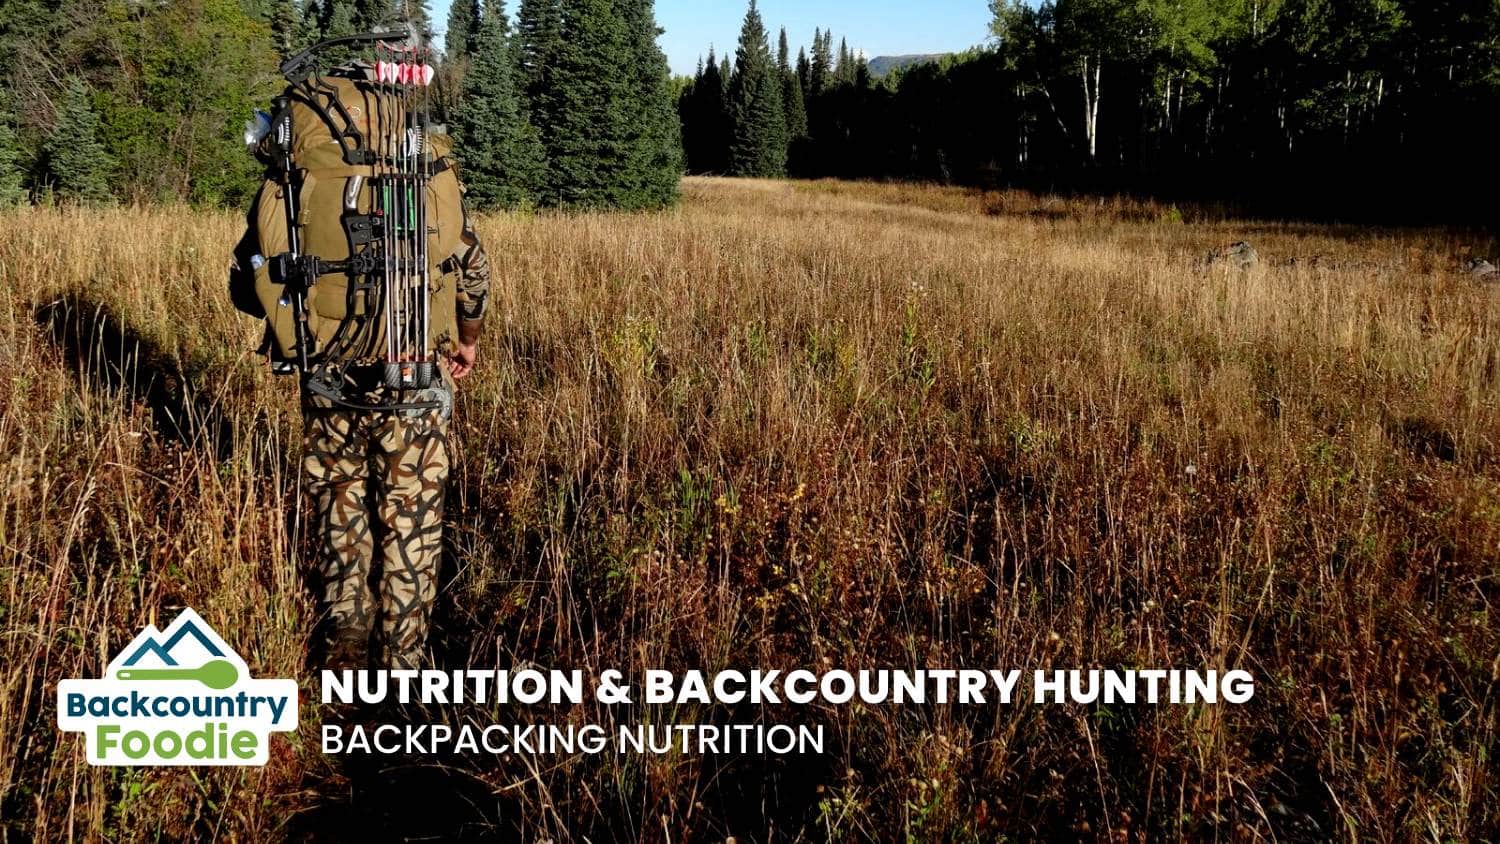 Backcountry Foodie Blog Nutrition and Backcountry Hunting Backpacking Nutrition thumbnail